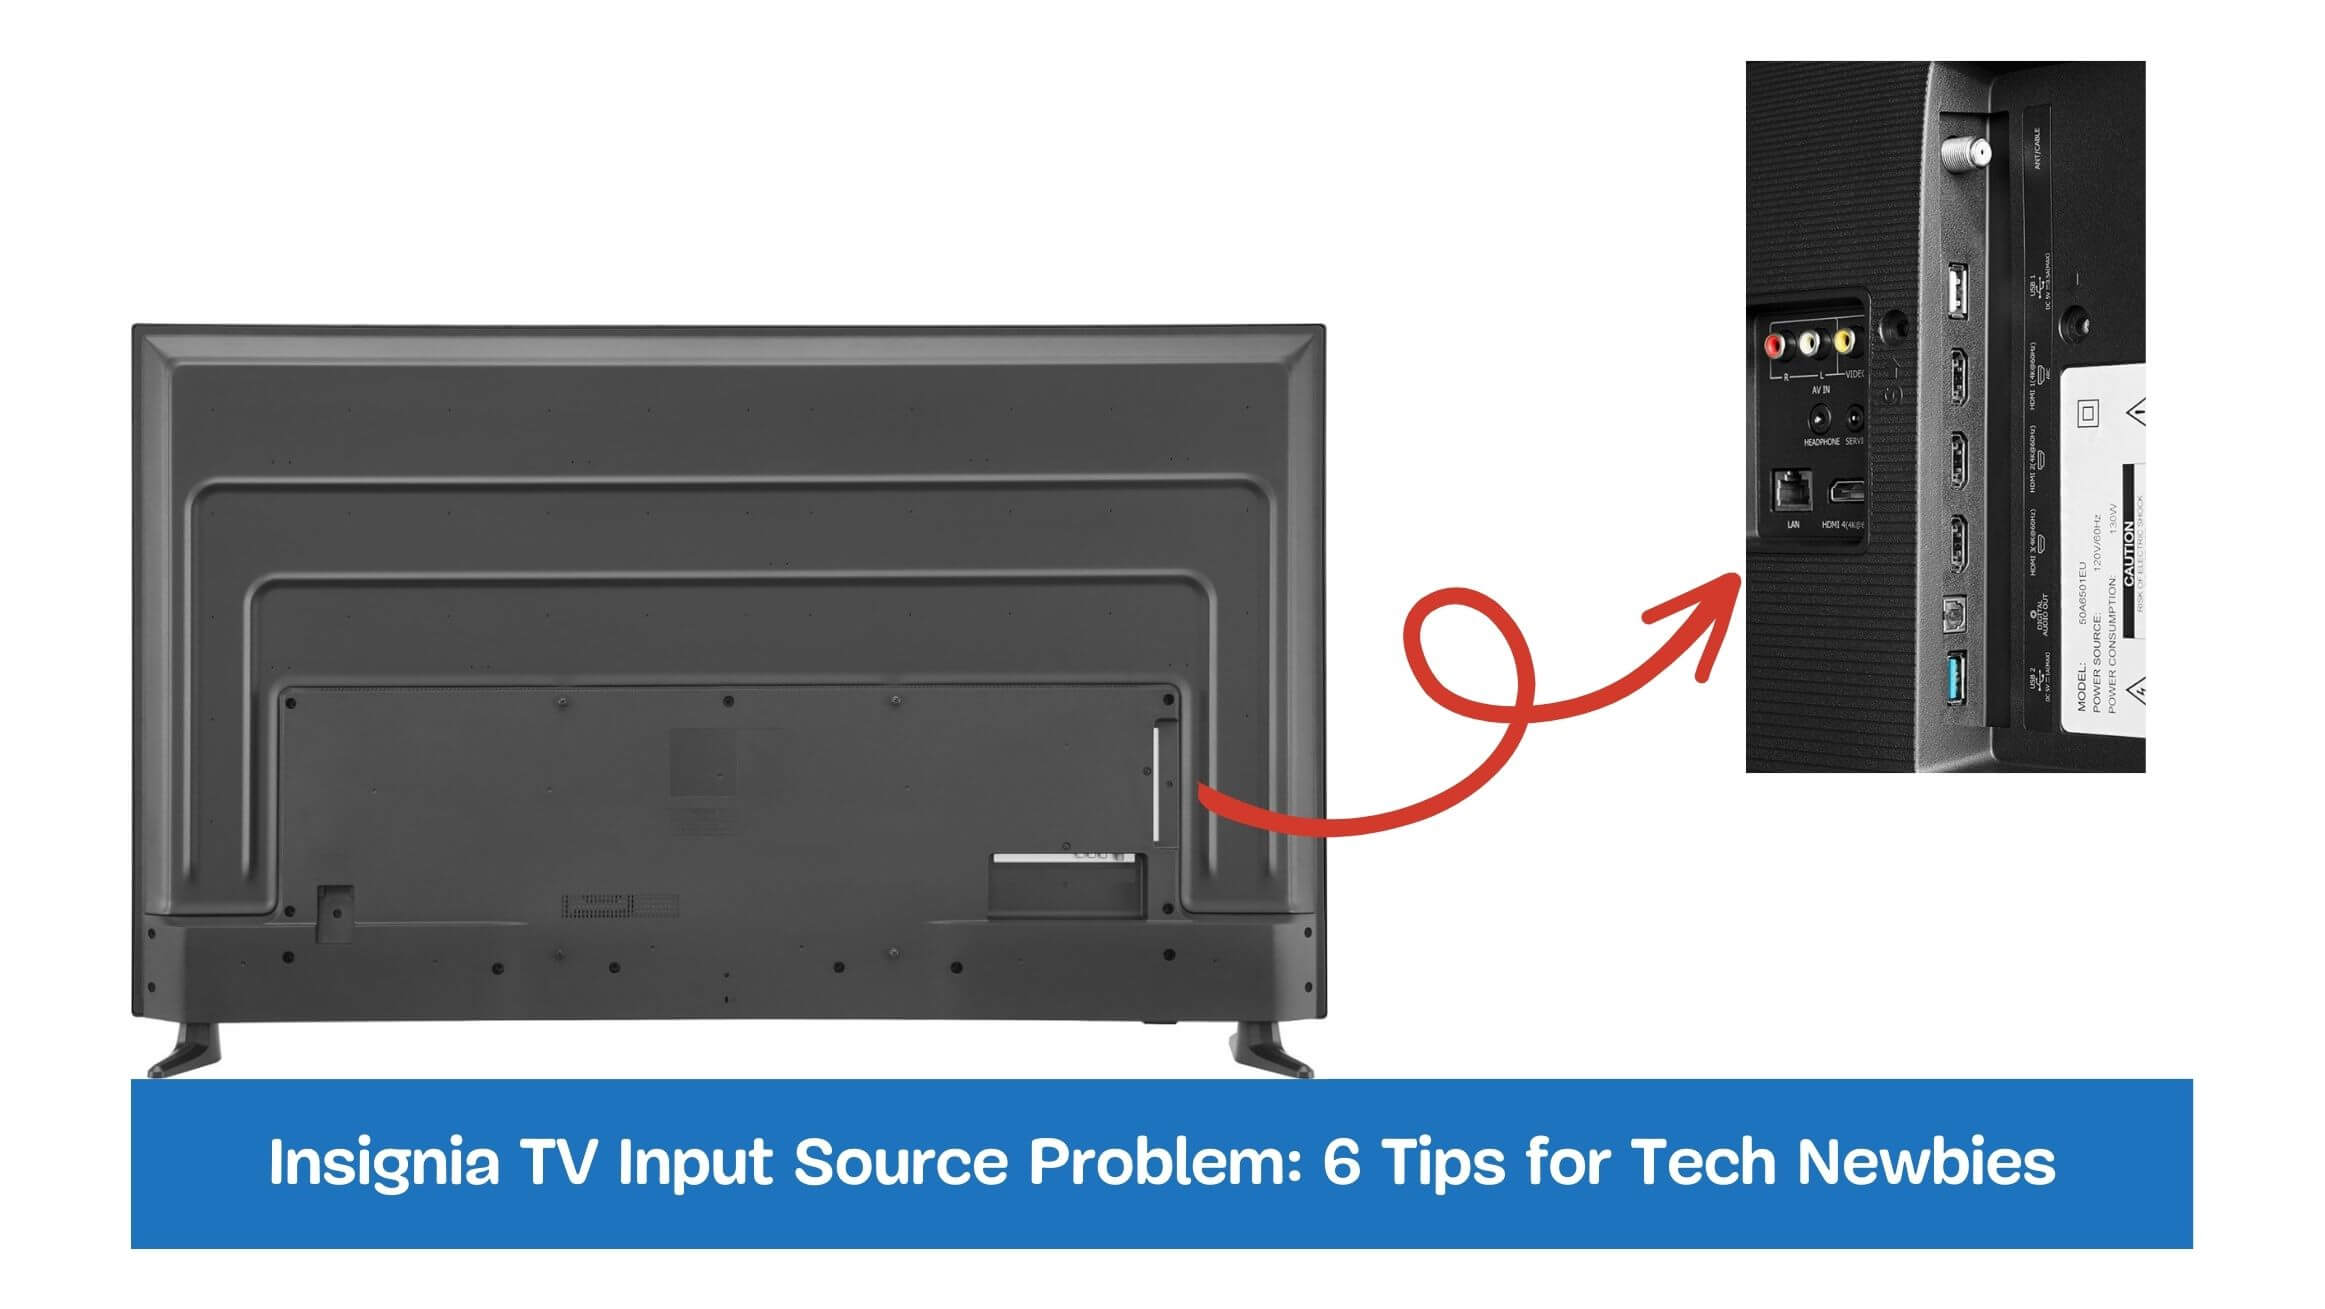 Insignia TV Input Source Problem: 6 Tips for Tech Newbies